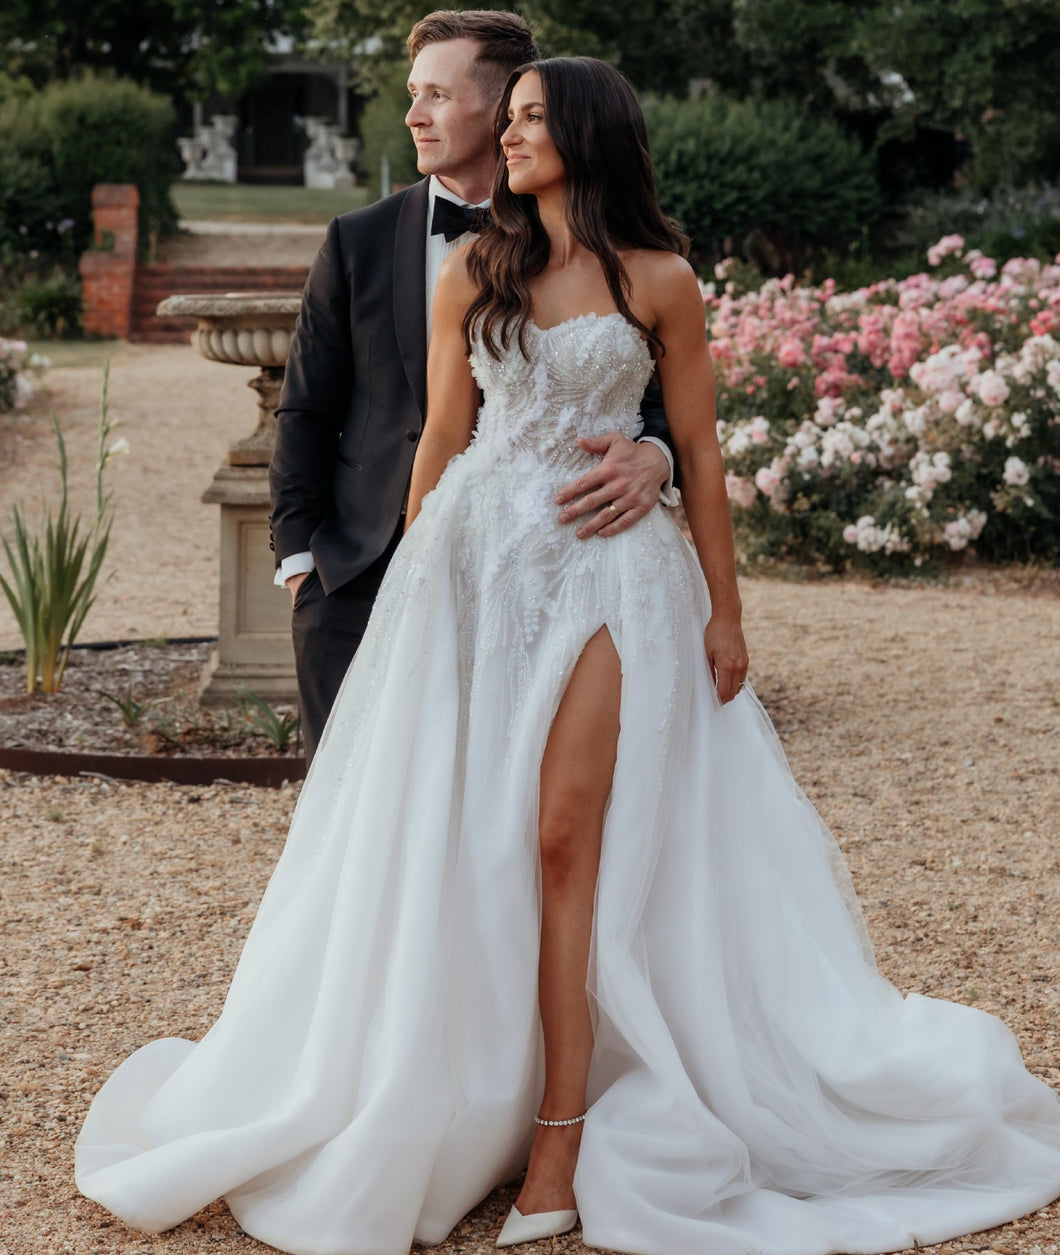 C2023-SS63P - strapless sweetheart beaded wedding gown with thigh high split and detachable train